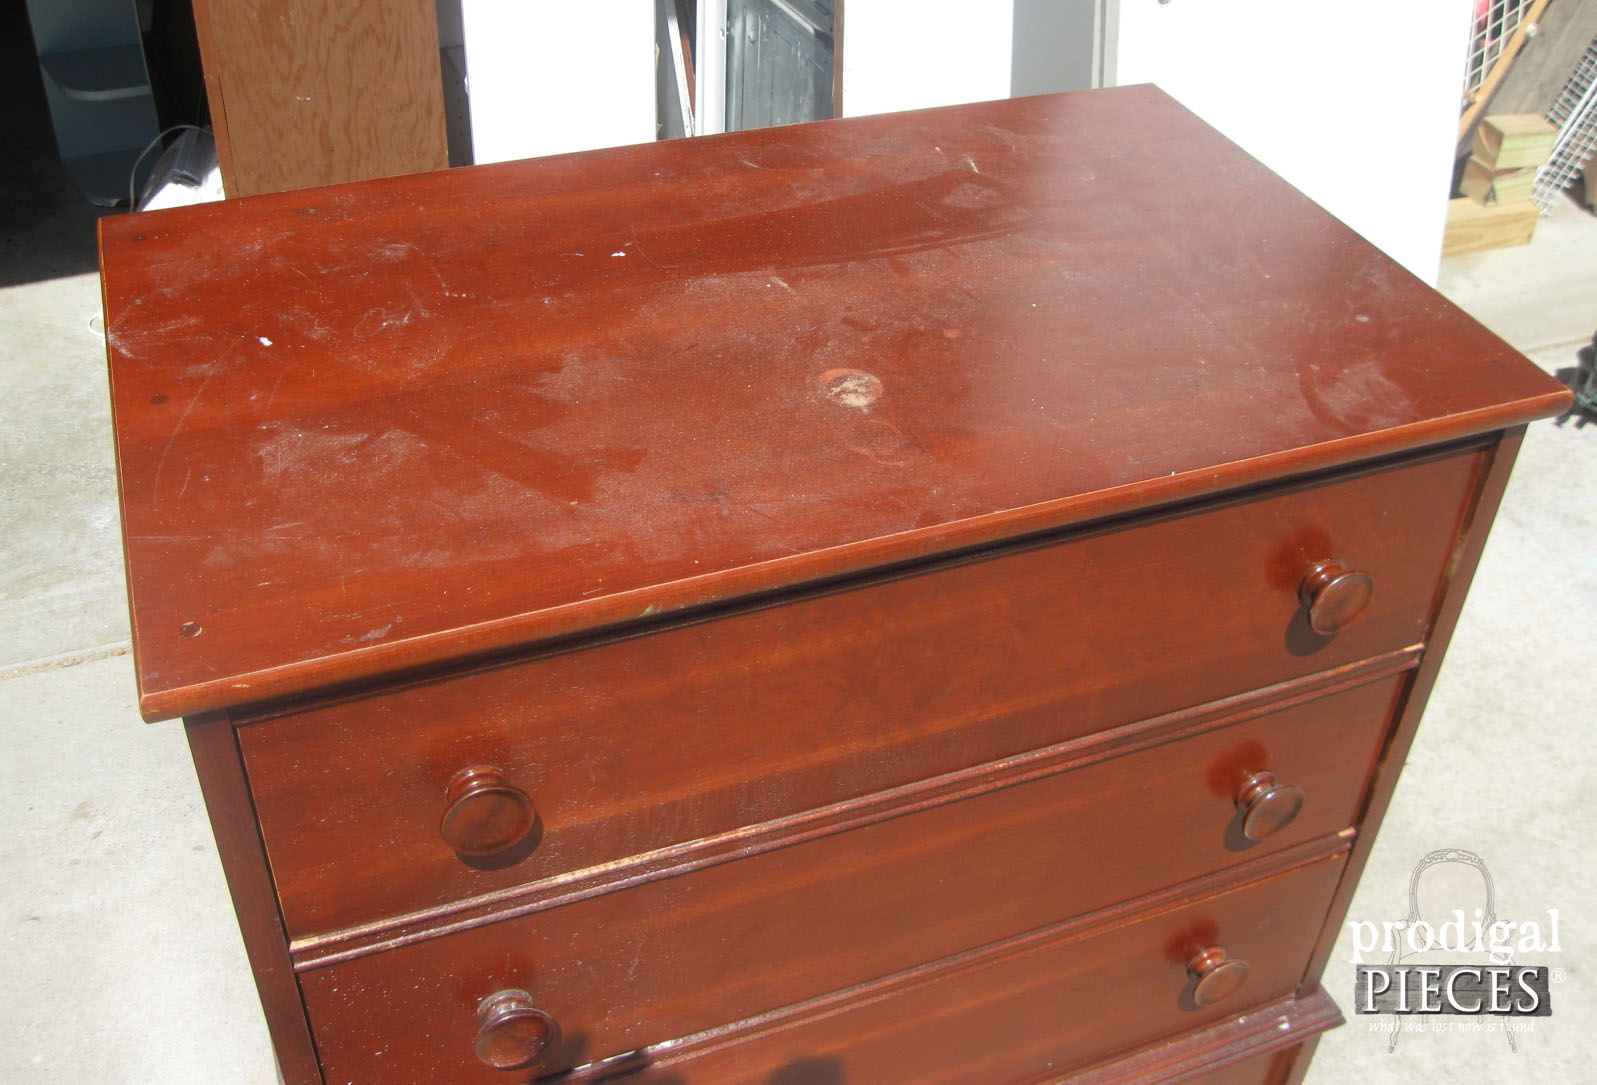 Top of Vintage Chest of Drawers | Prodigal Pieces | www.prodigalpieces.com